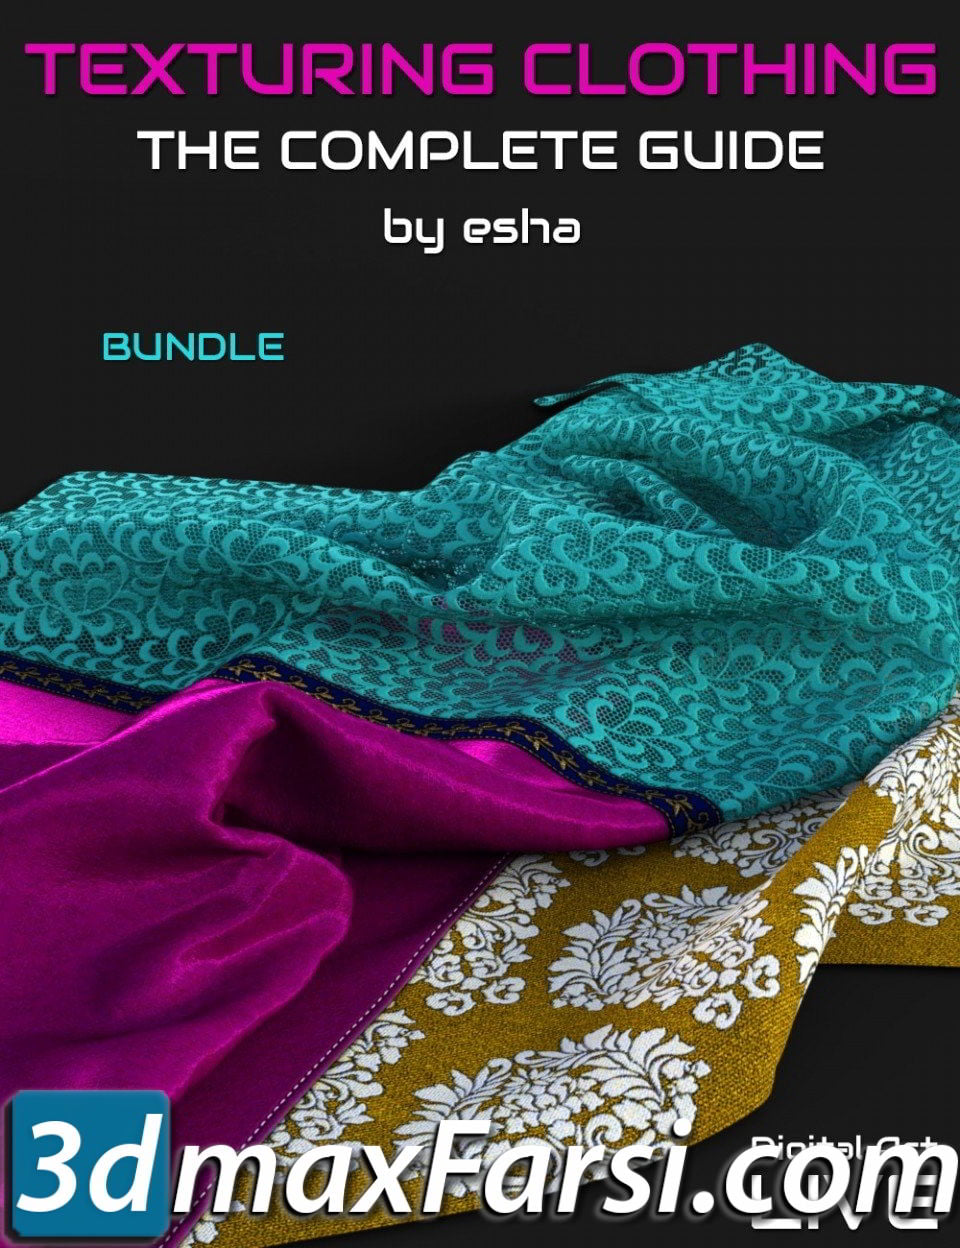 Daz3d, the complete guide to texturing clothing bundle free download